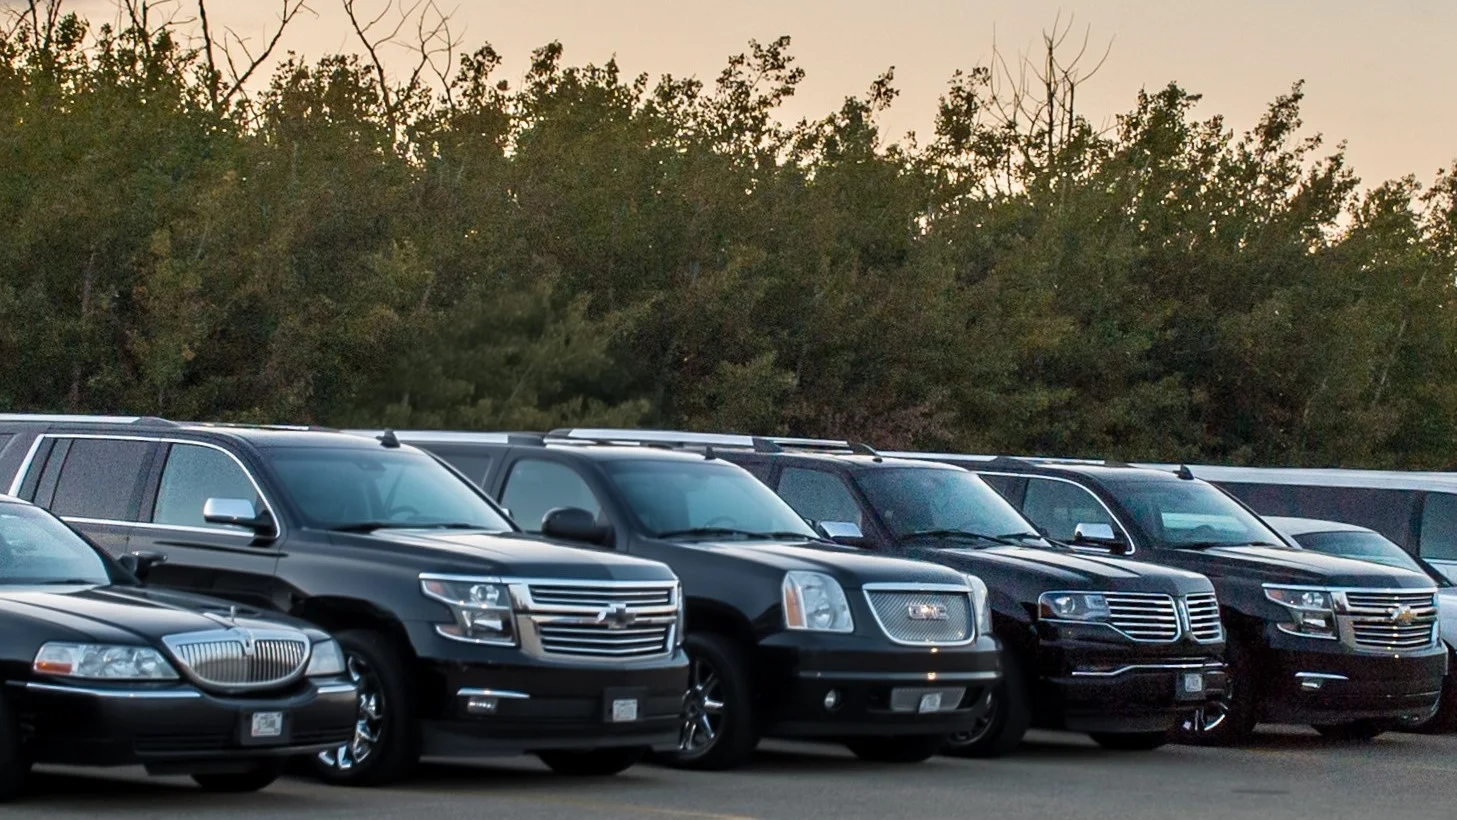 BUF Airport Limo Service